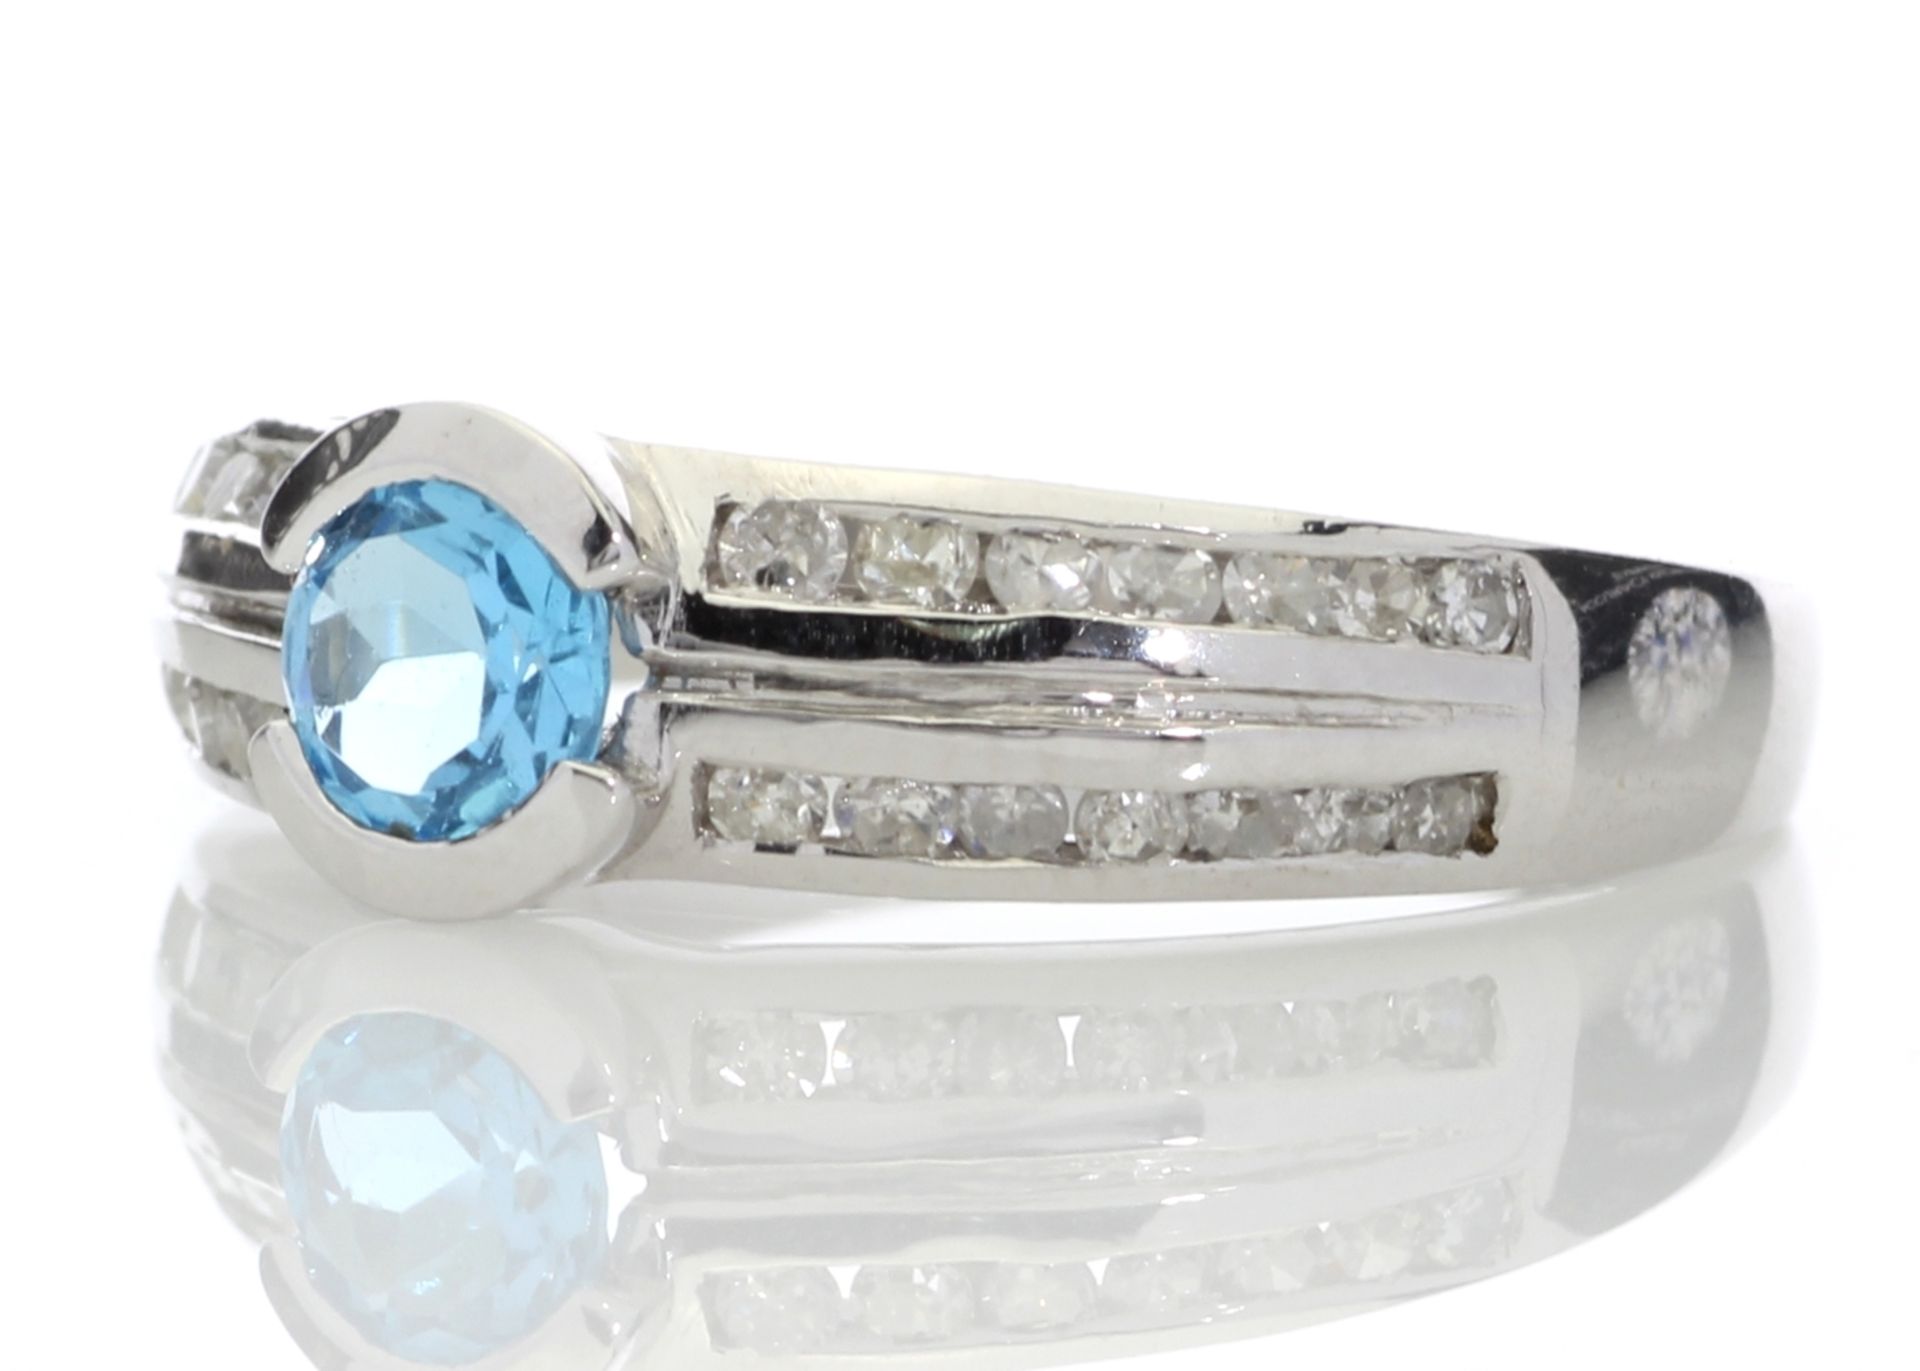 9ct White Gold Double Channel Set Diamond and Blue Topaz Ring 0.36 Carats - Valued by GIE £1,045. - Image 2 of 5